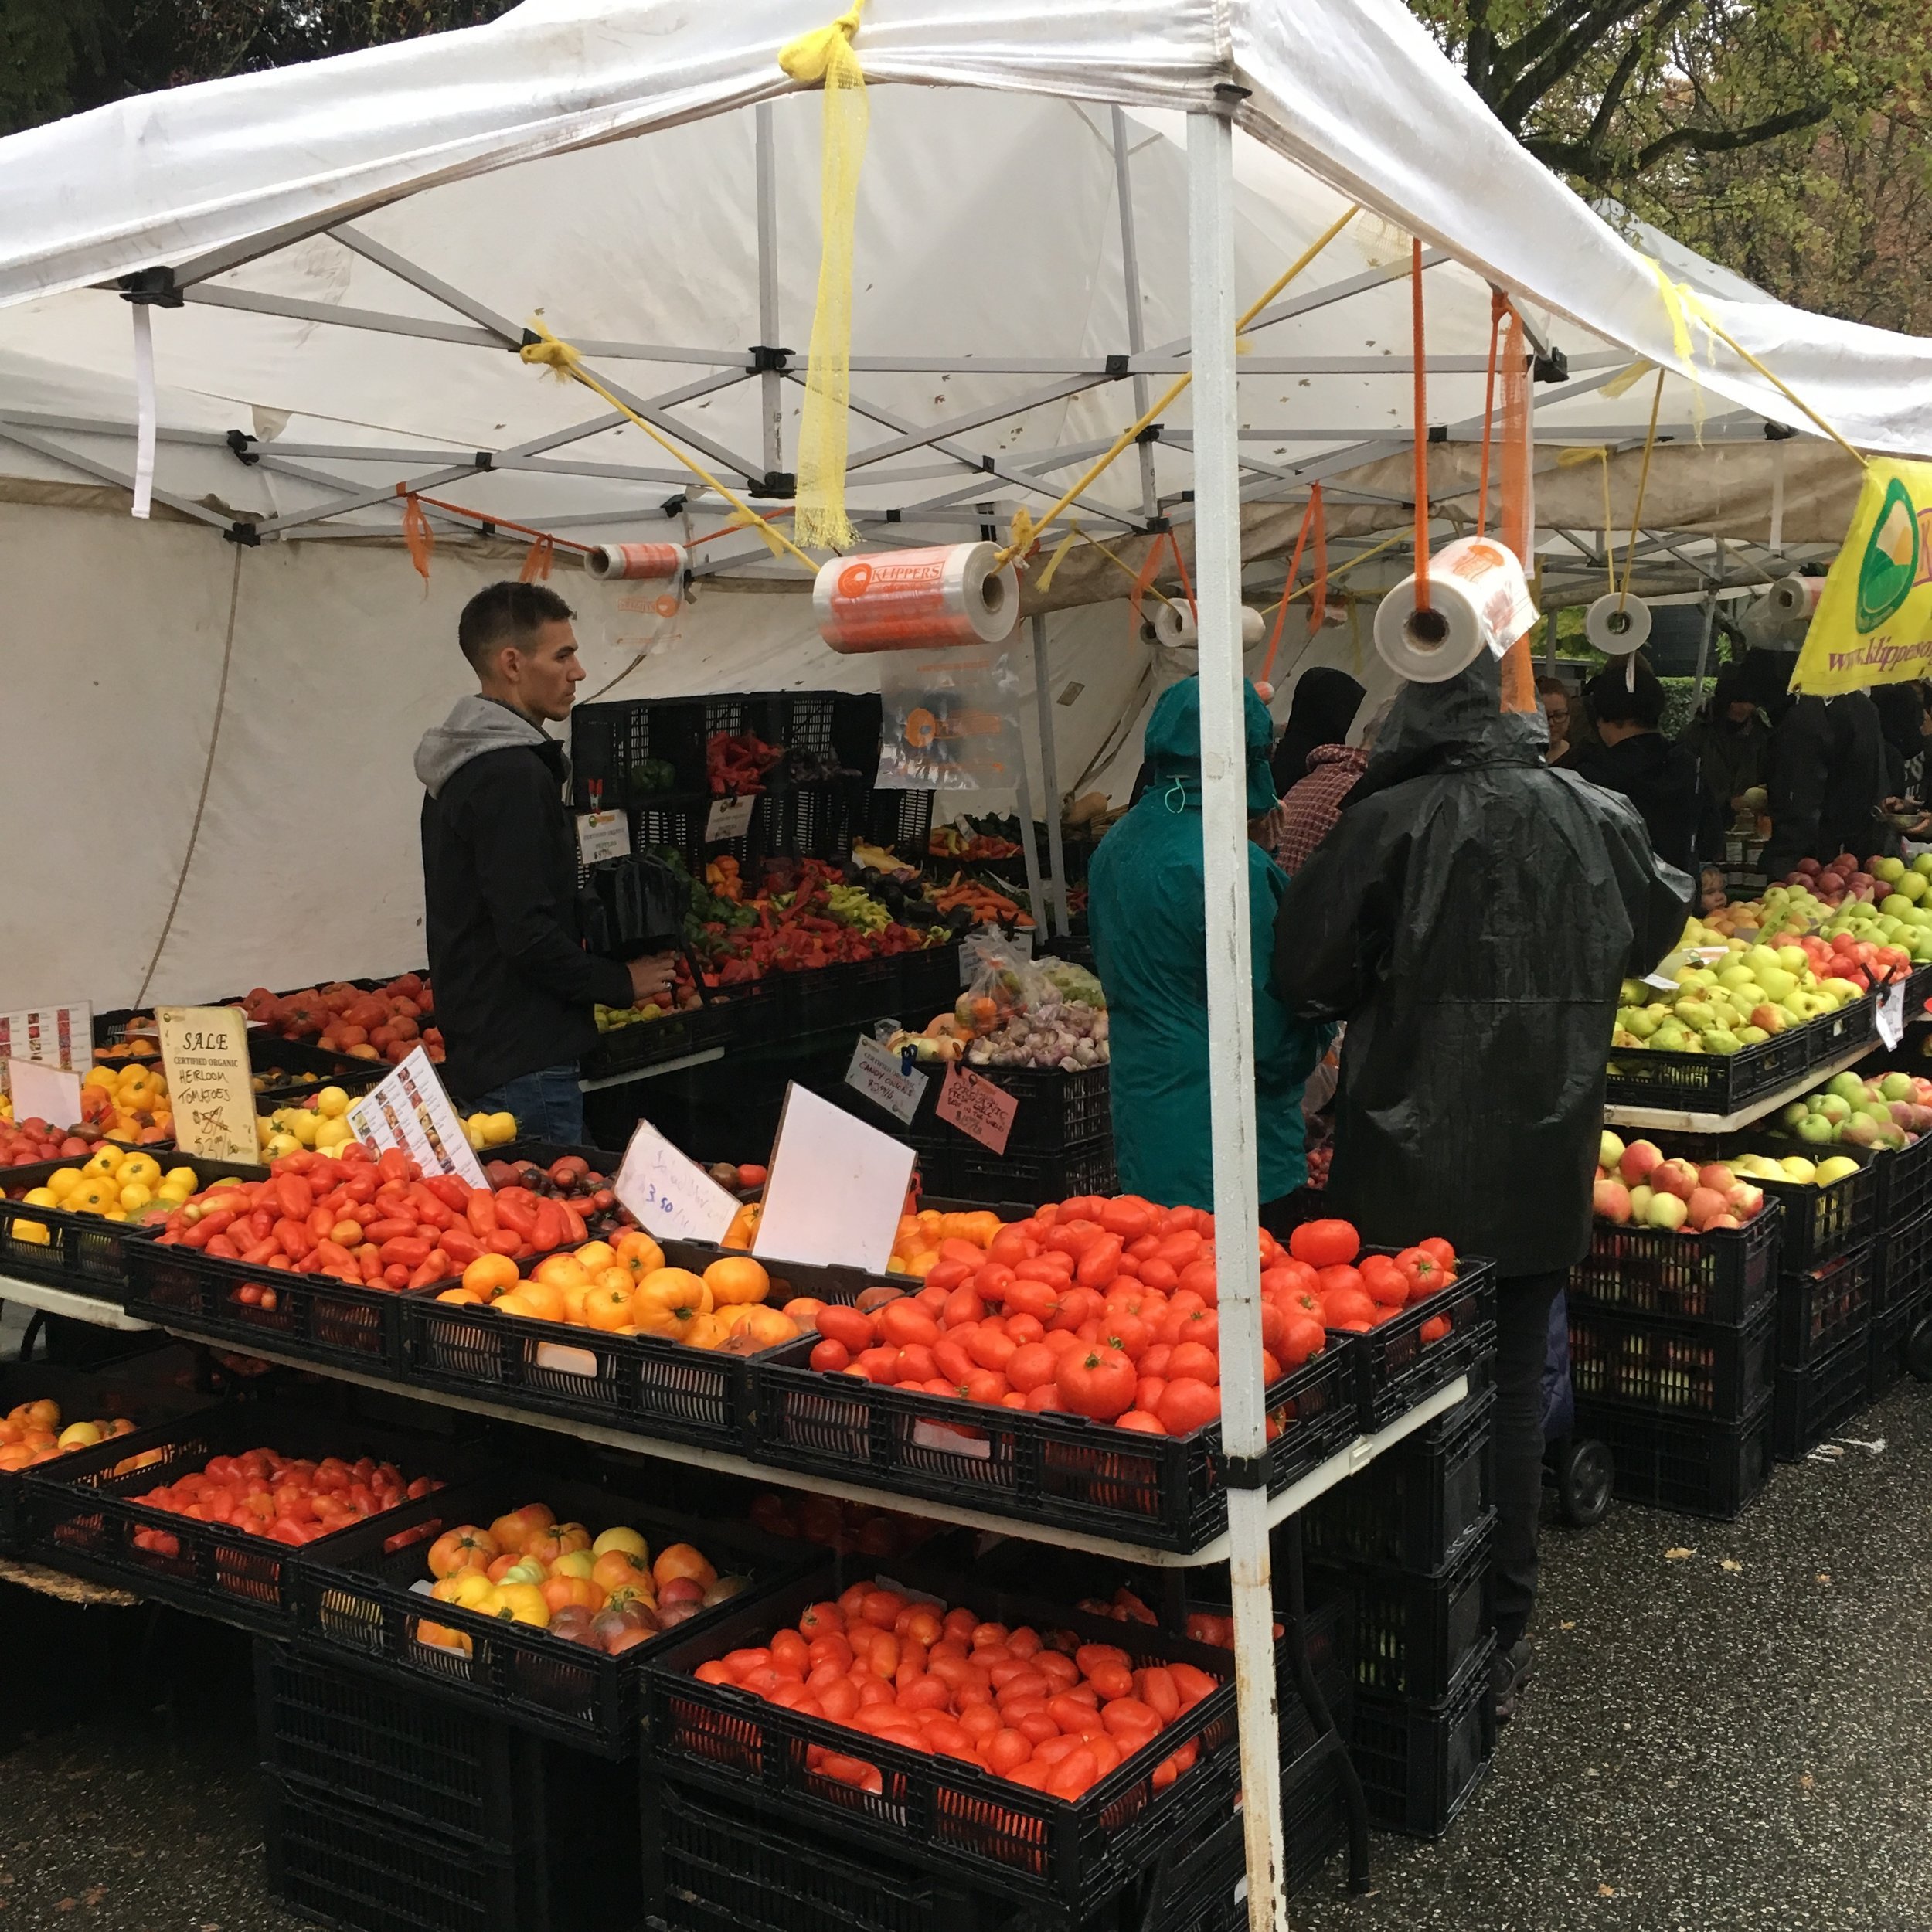 Neighborhood farmers markets connect urban community and countryside